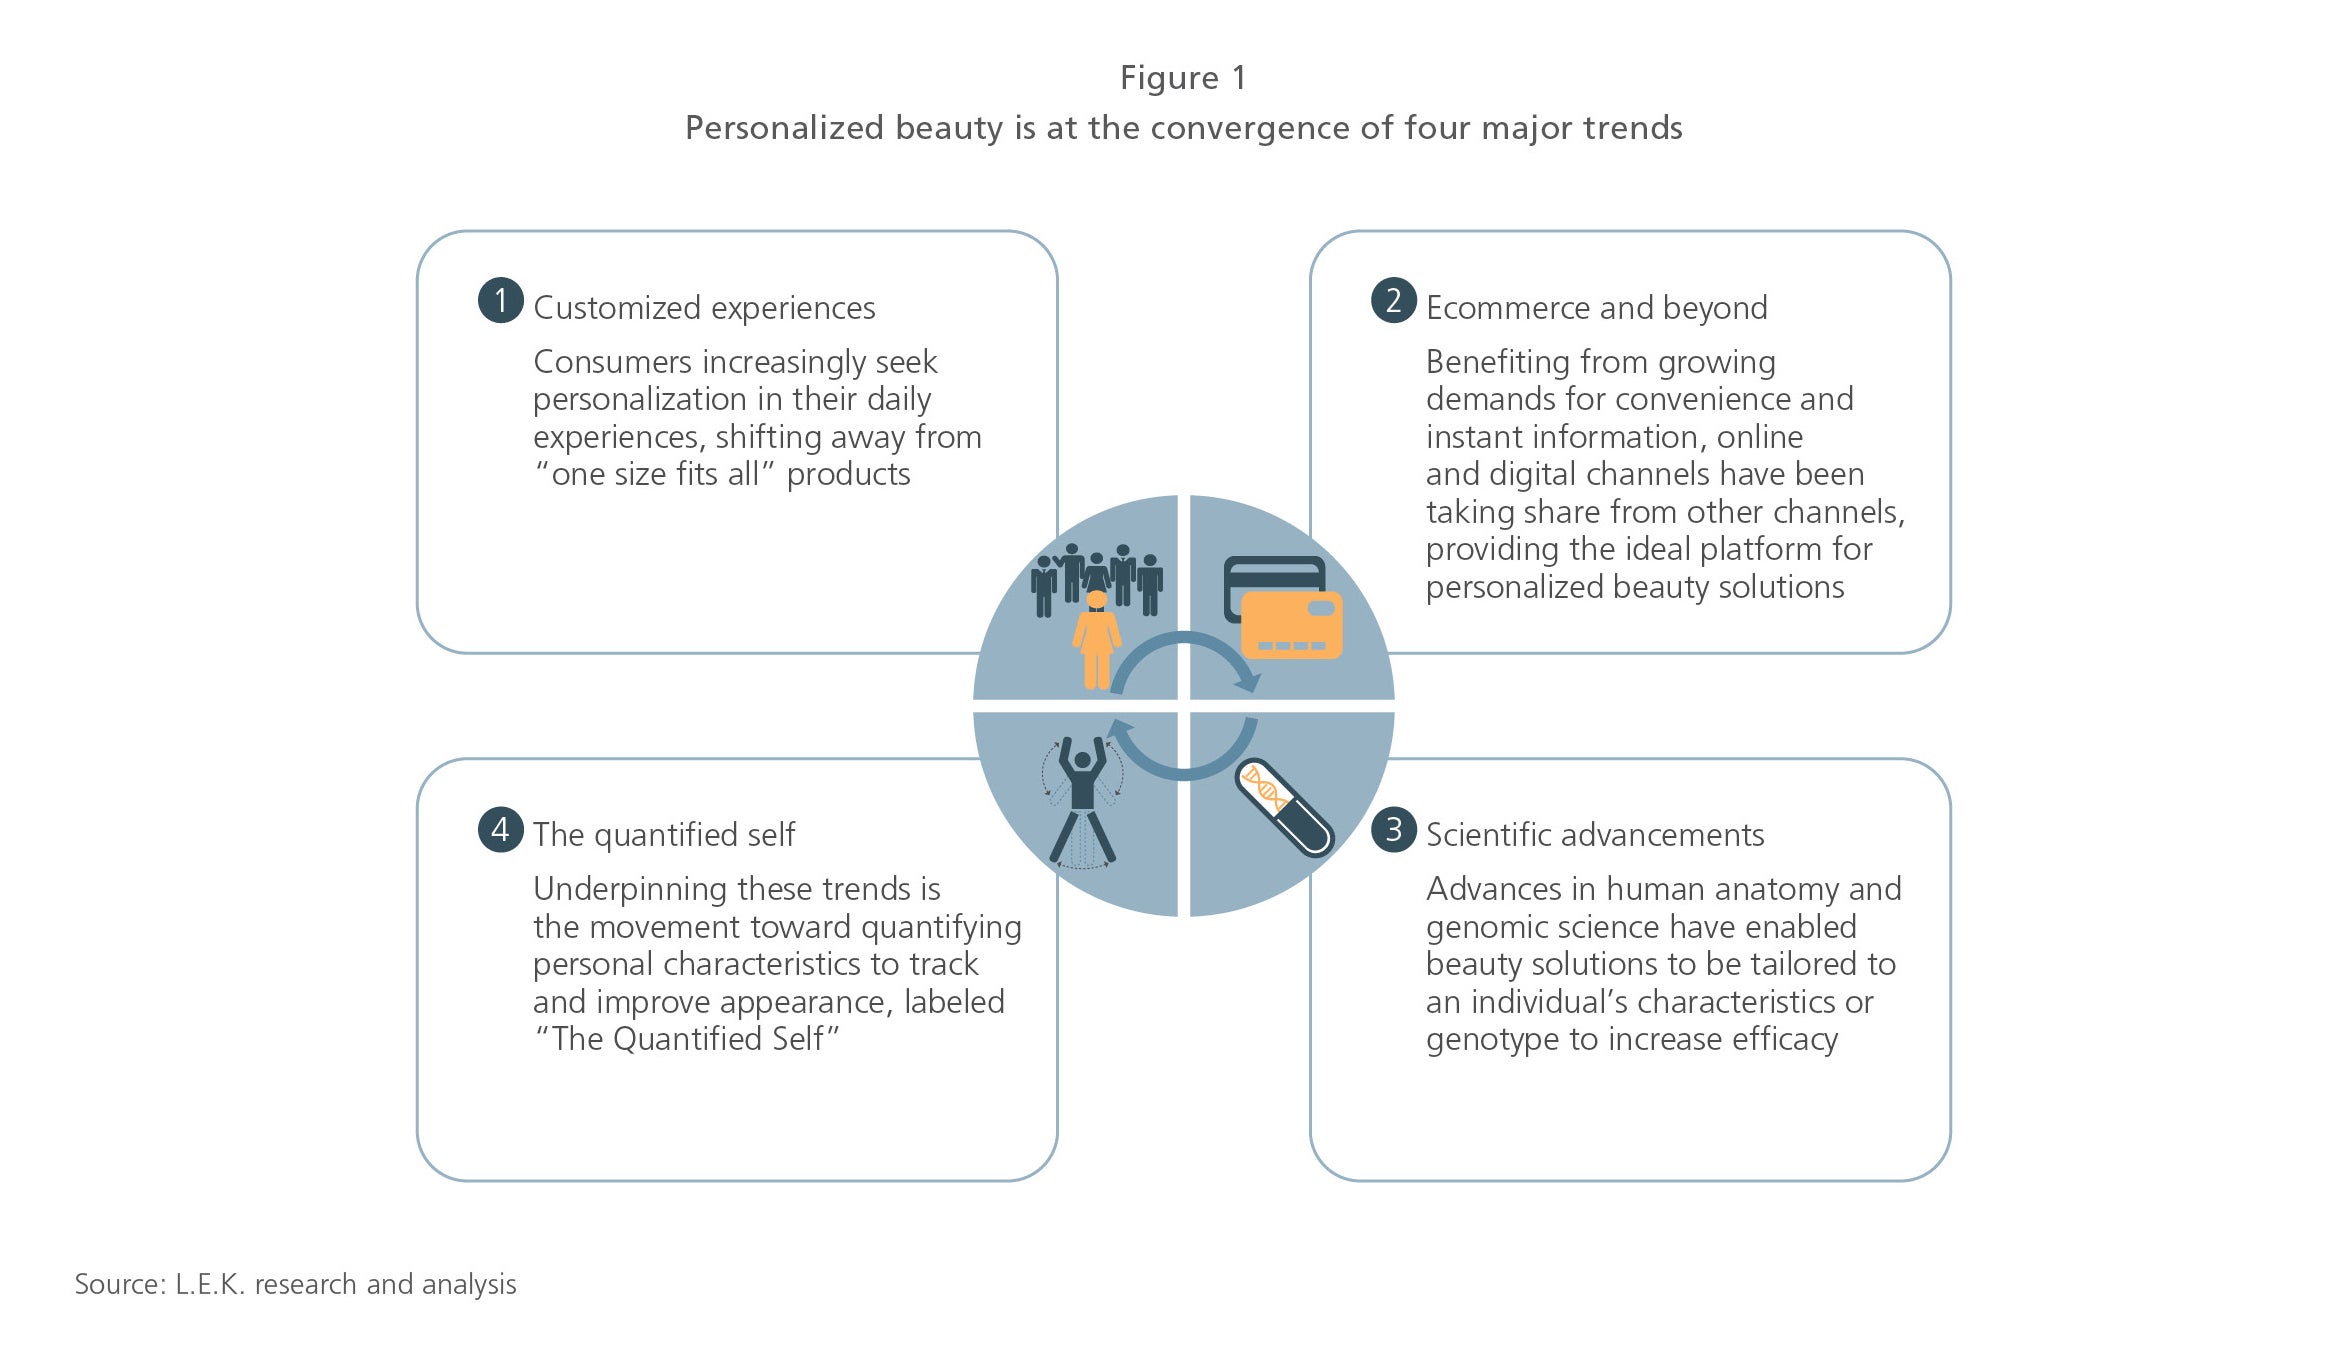 Personalized beauty is at the convergence of four major trends